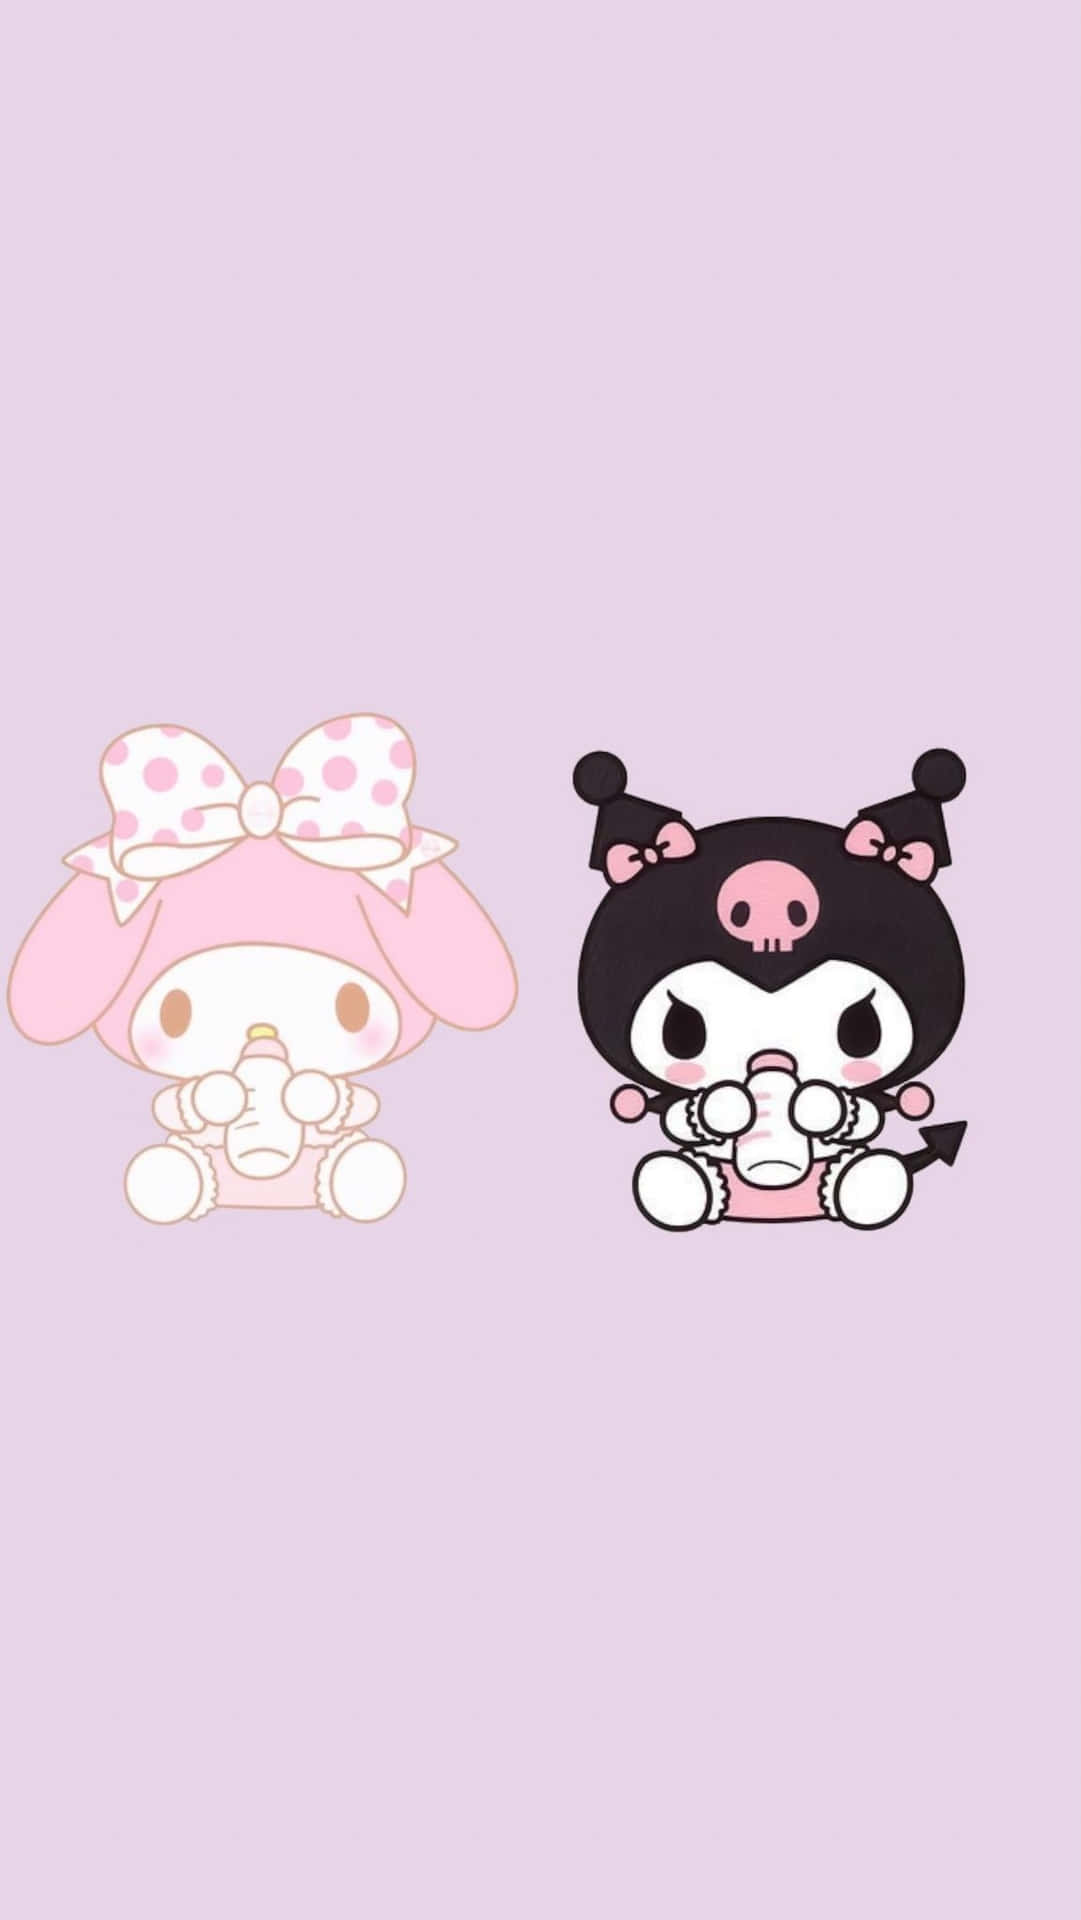 Kuromi and My Melody: Best Friends in a Magical World Wallpaper